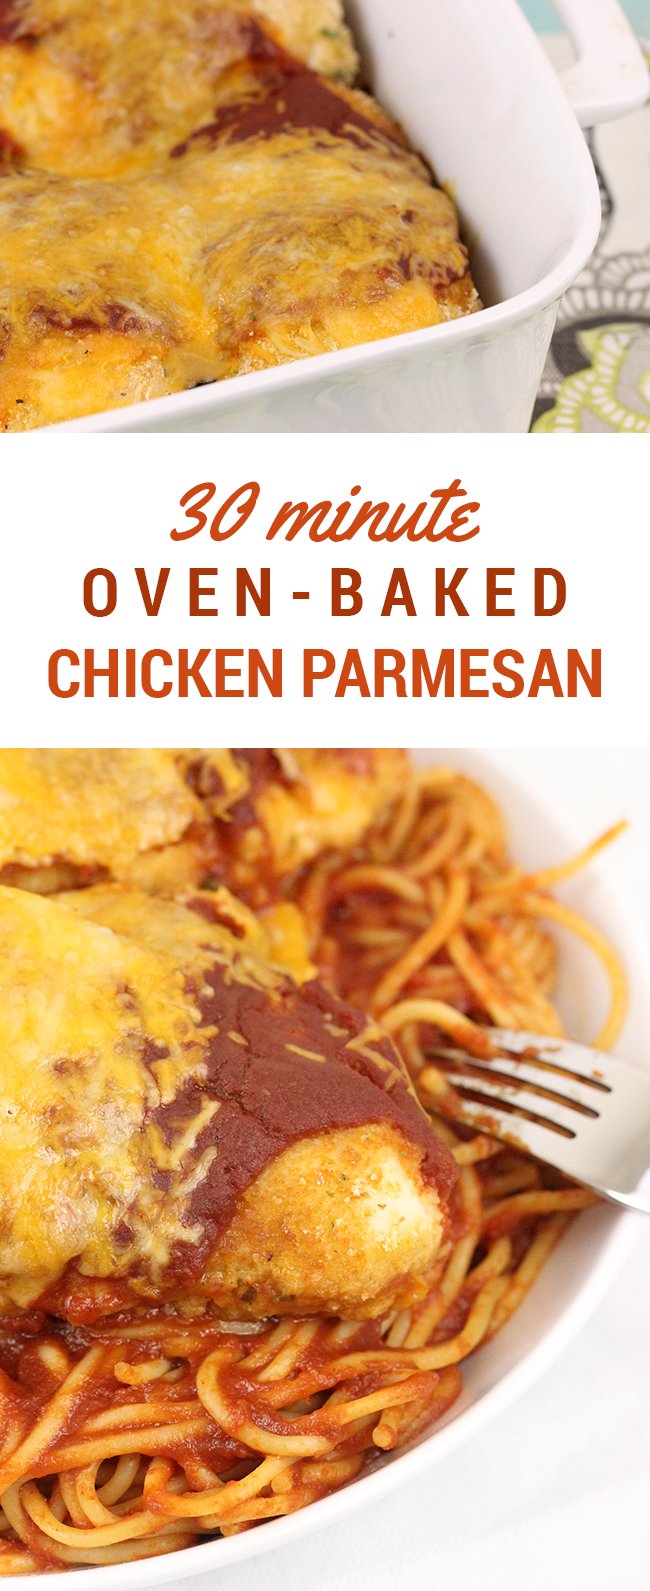 Yum! Easy weeknight dinner! 30 Minute Oven-Baked Chicken Parm. Yes please! 